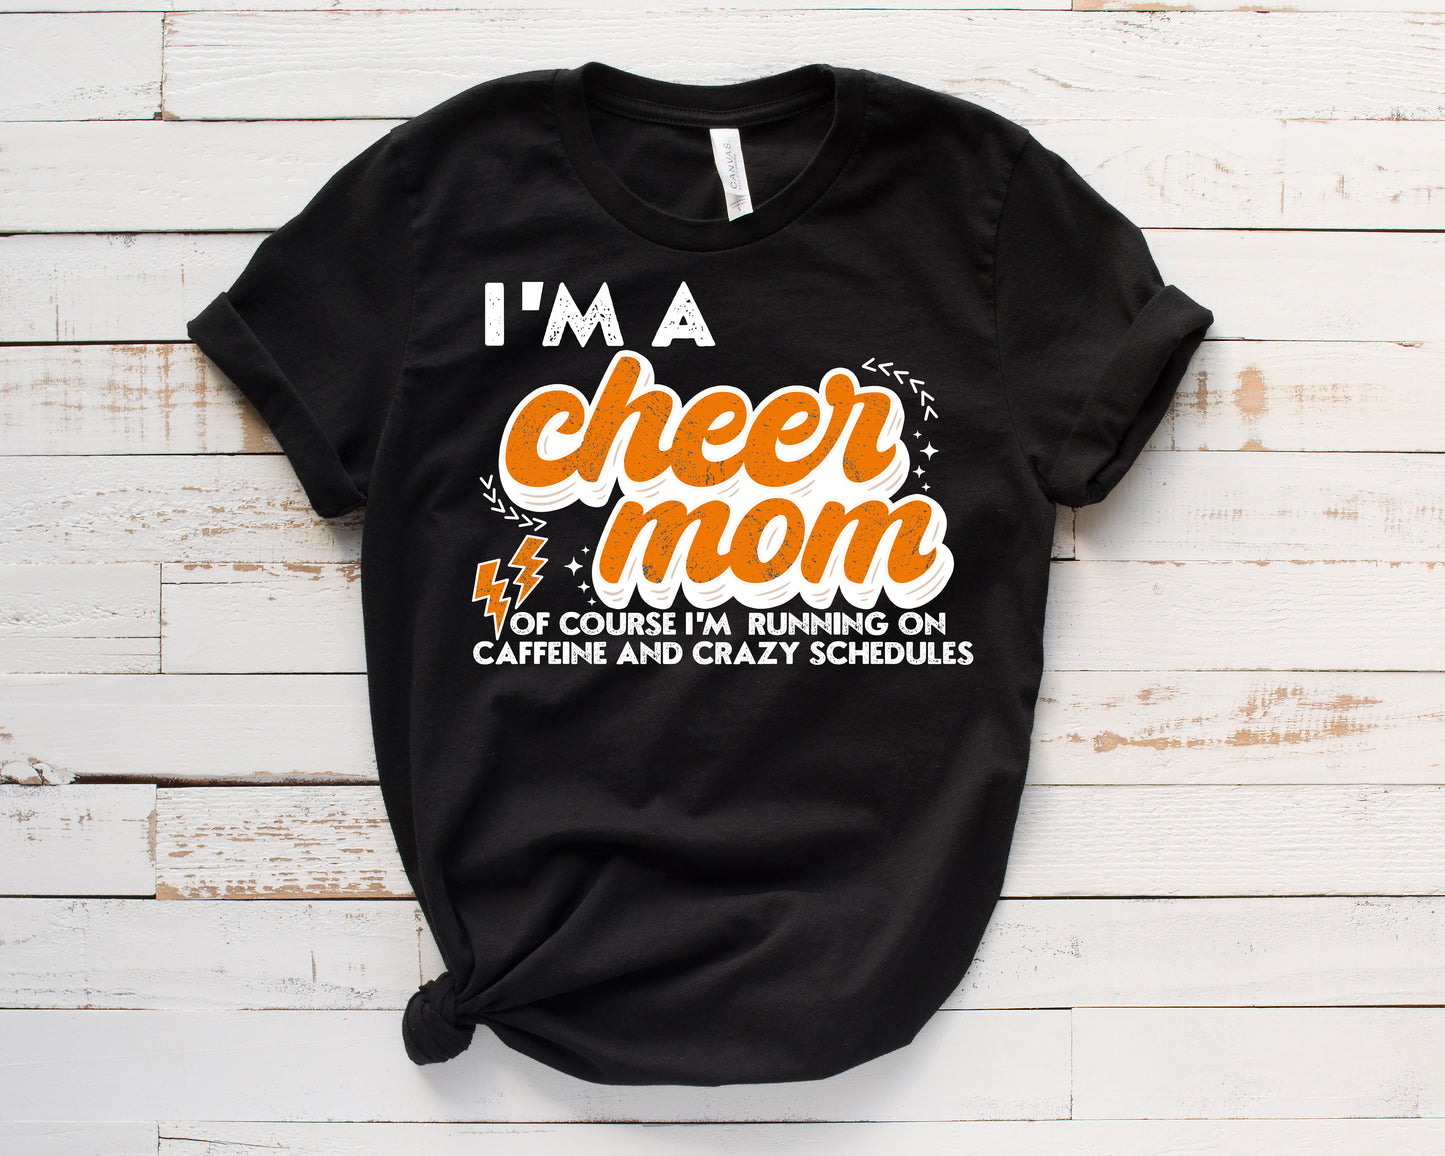 Spangle Cheer Mom - of course